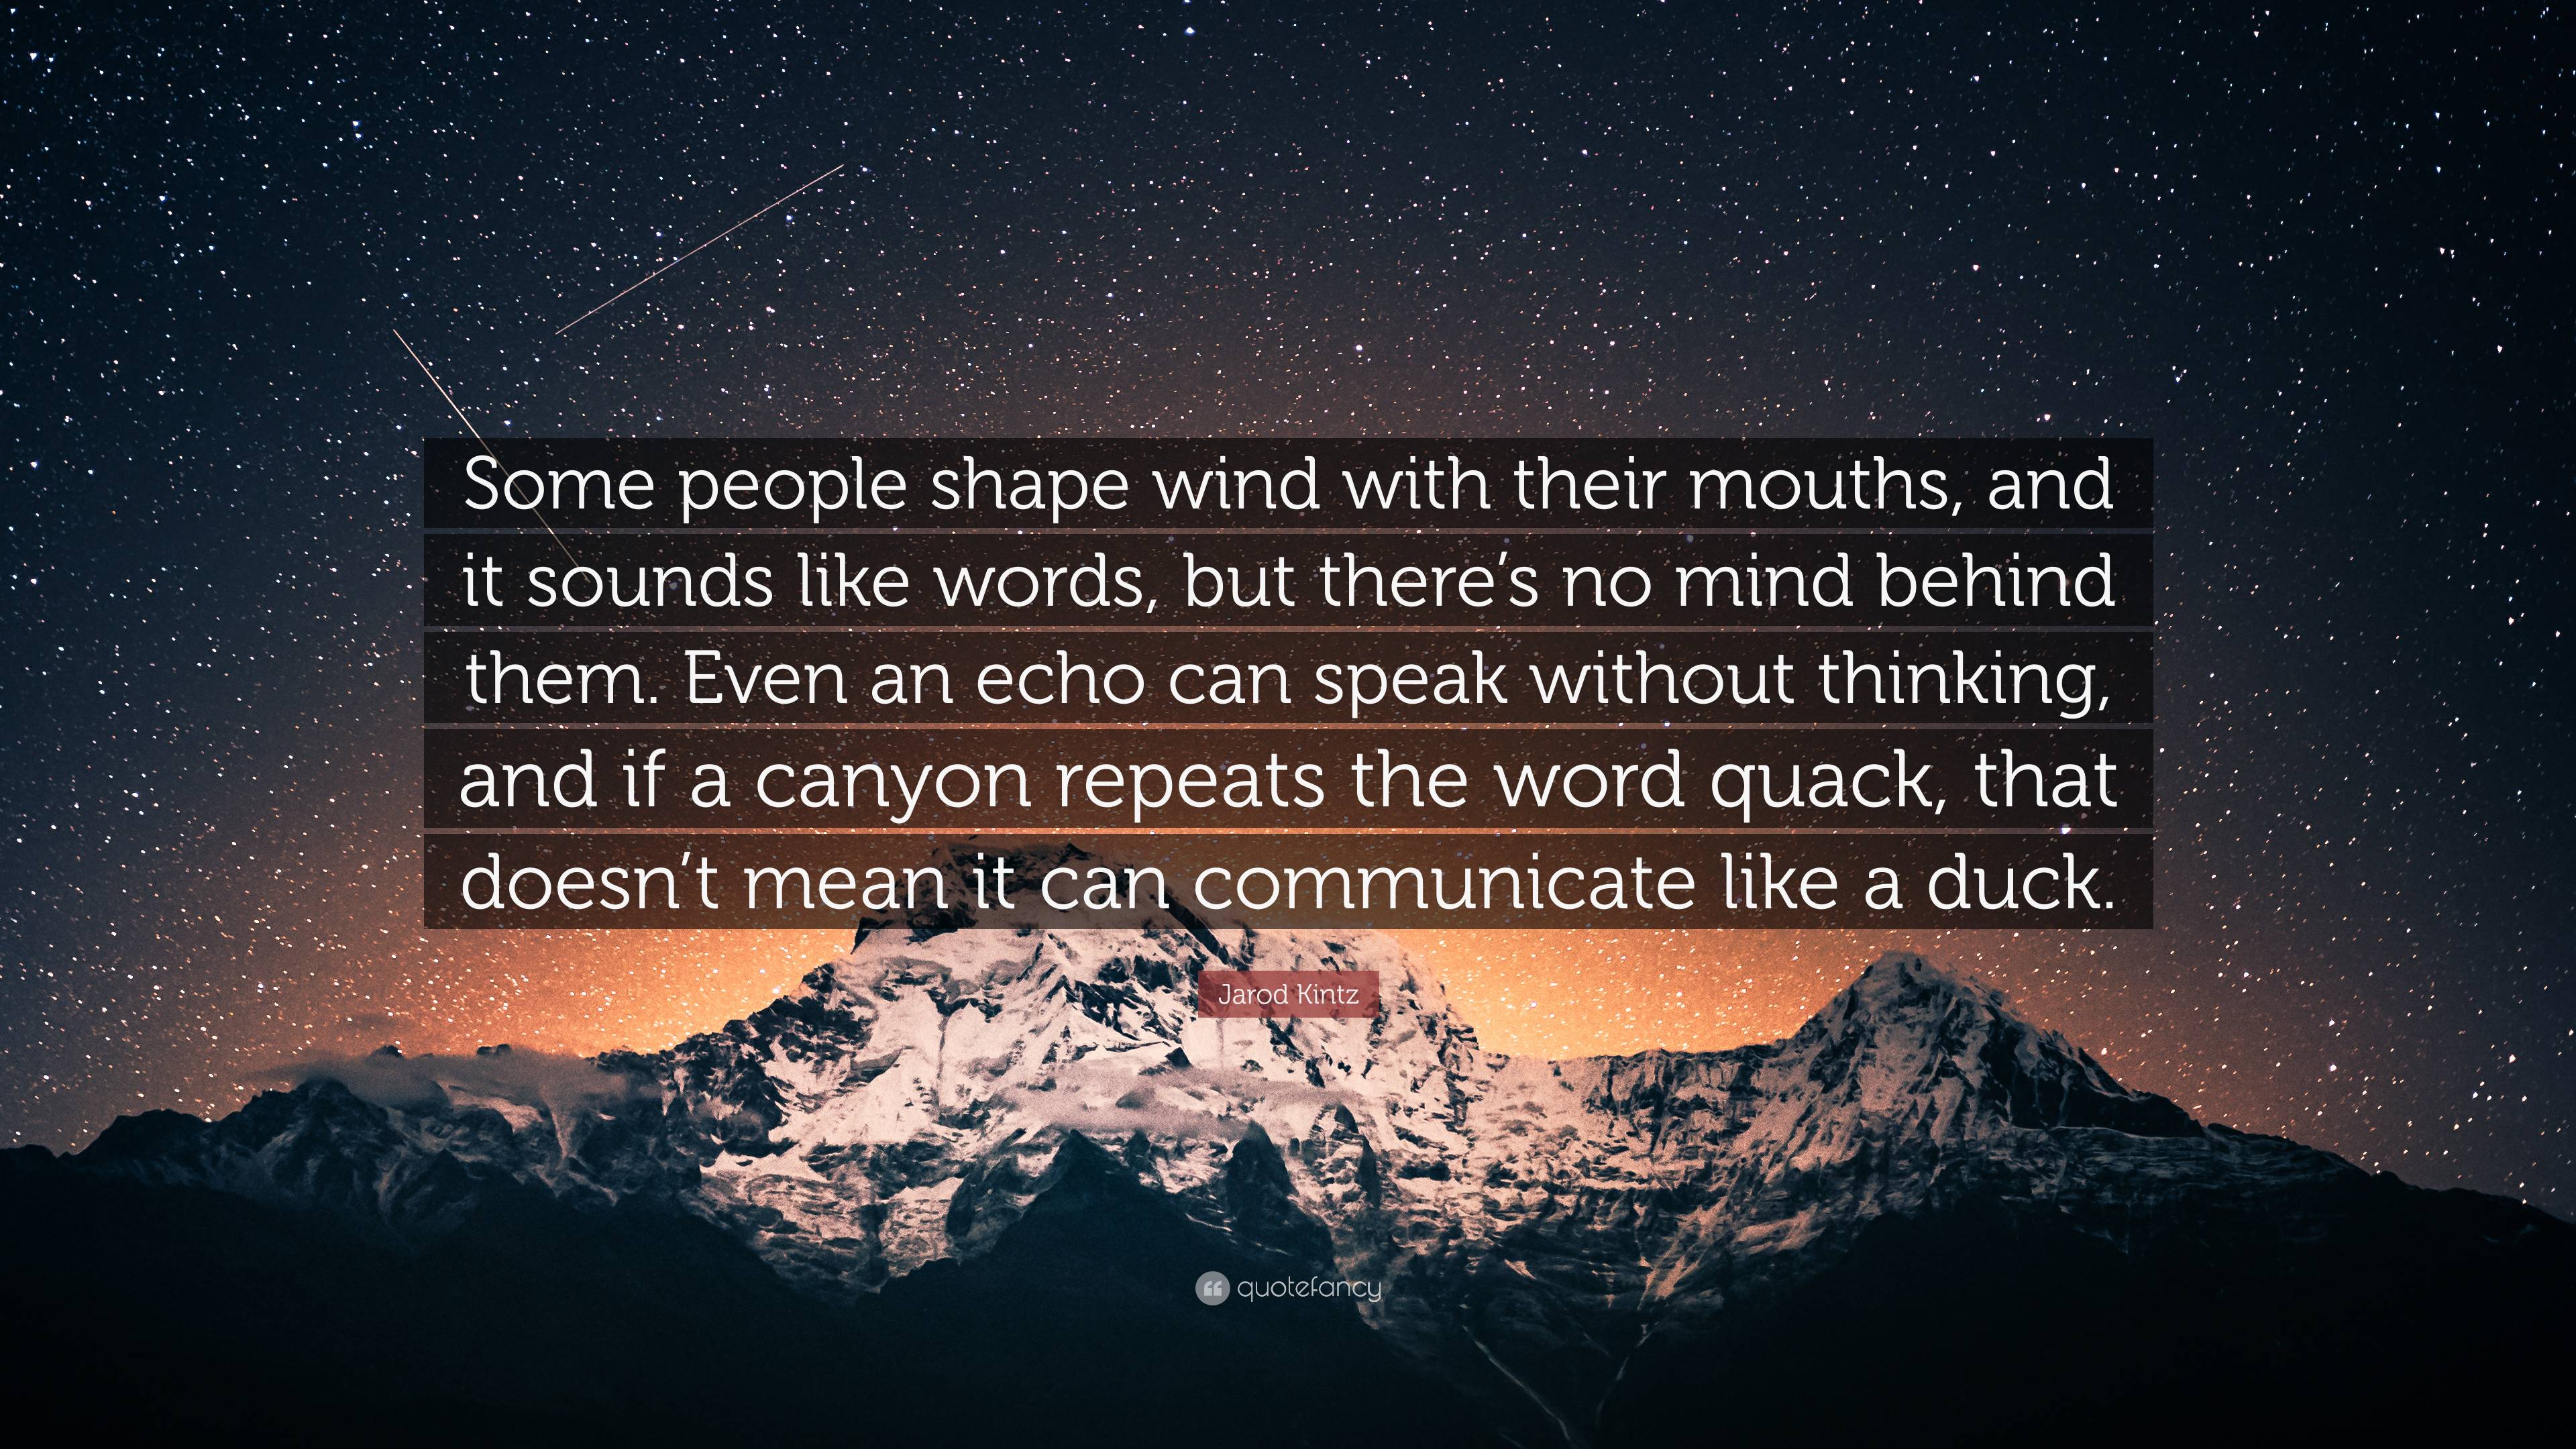 https://quotefancy.com/media/wallpaper/3840x2160/7239642-Jarod-Kintz-Quote-Some-people-shape-wind-with-their-mouths-and-it.jpg